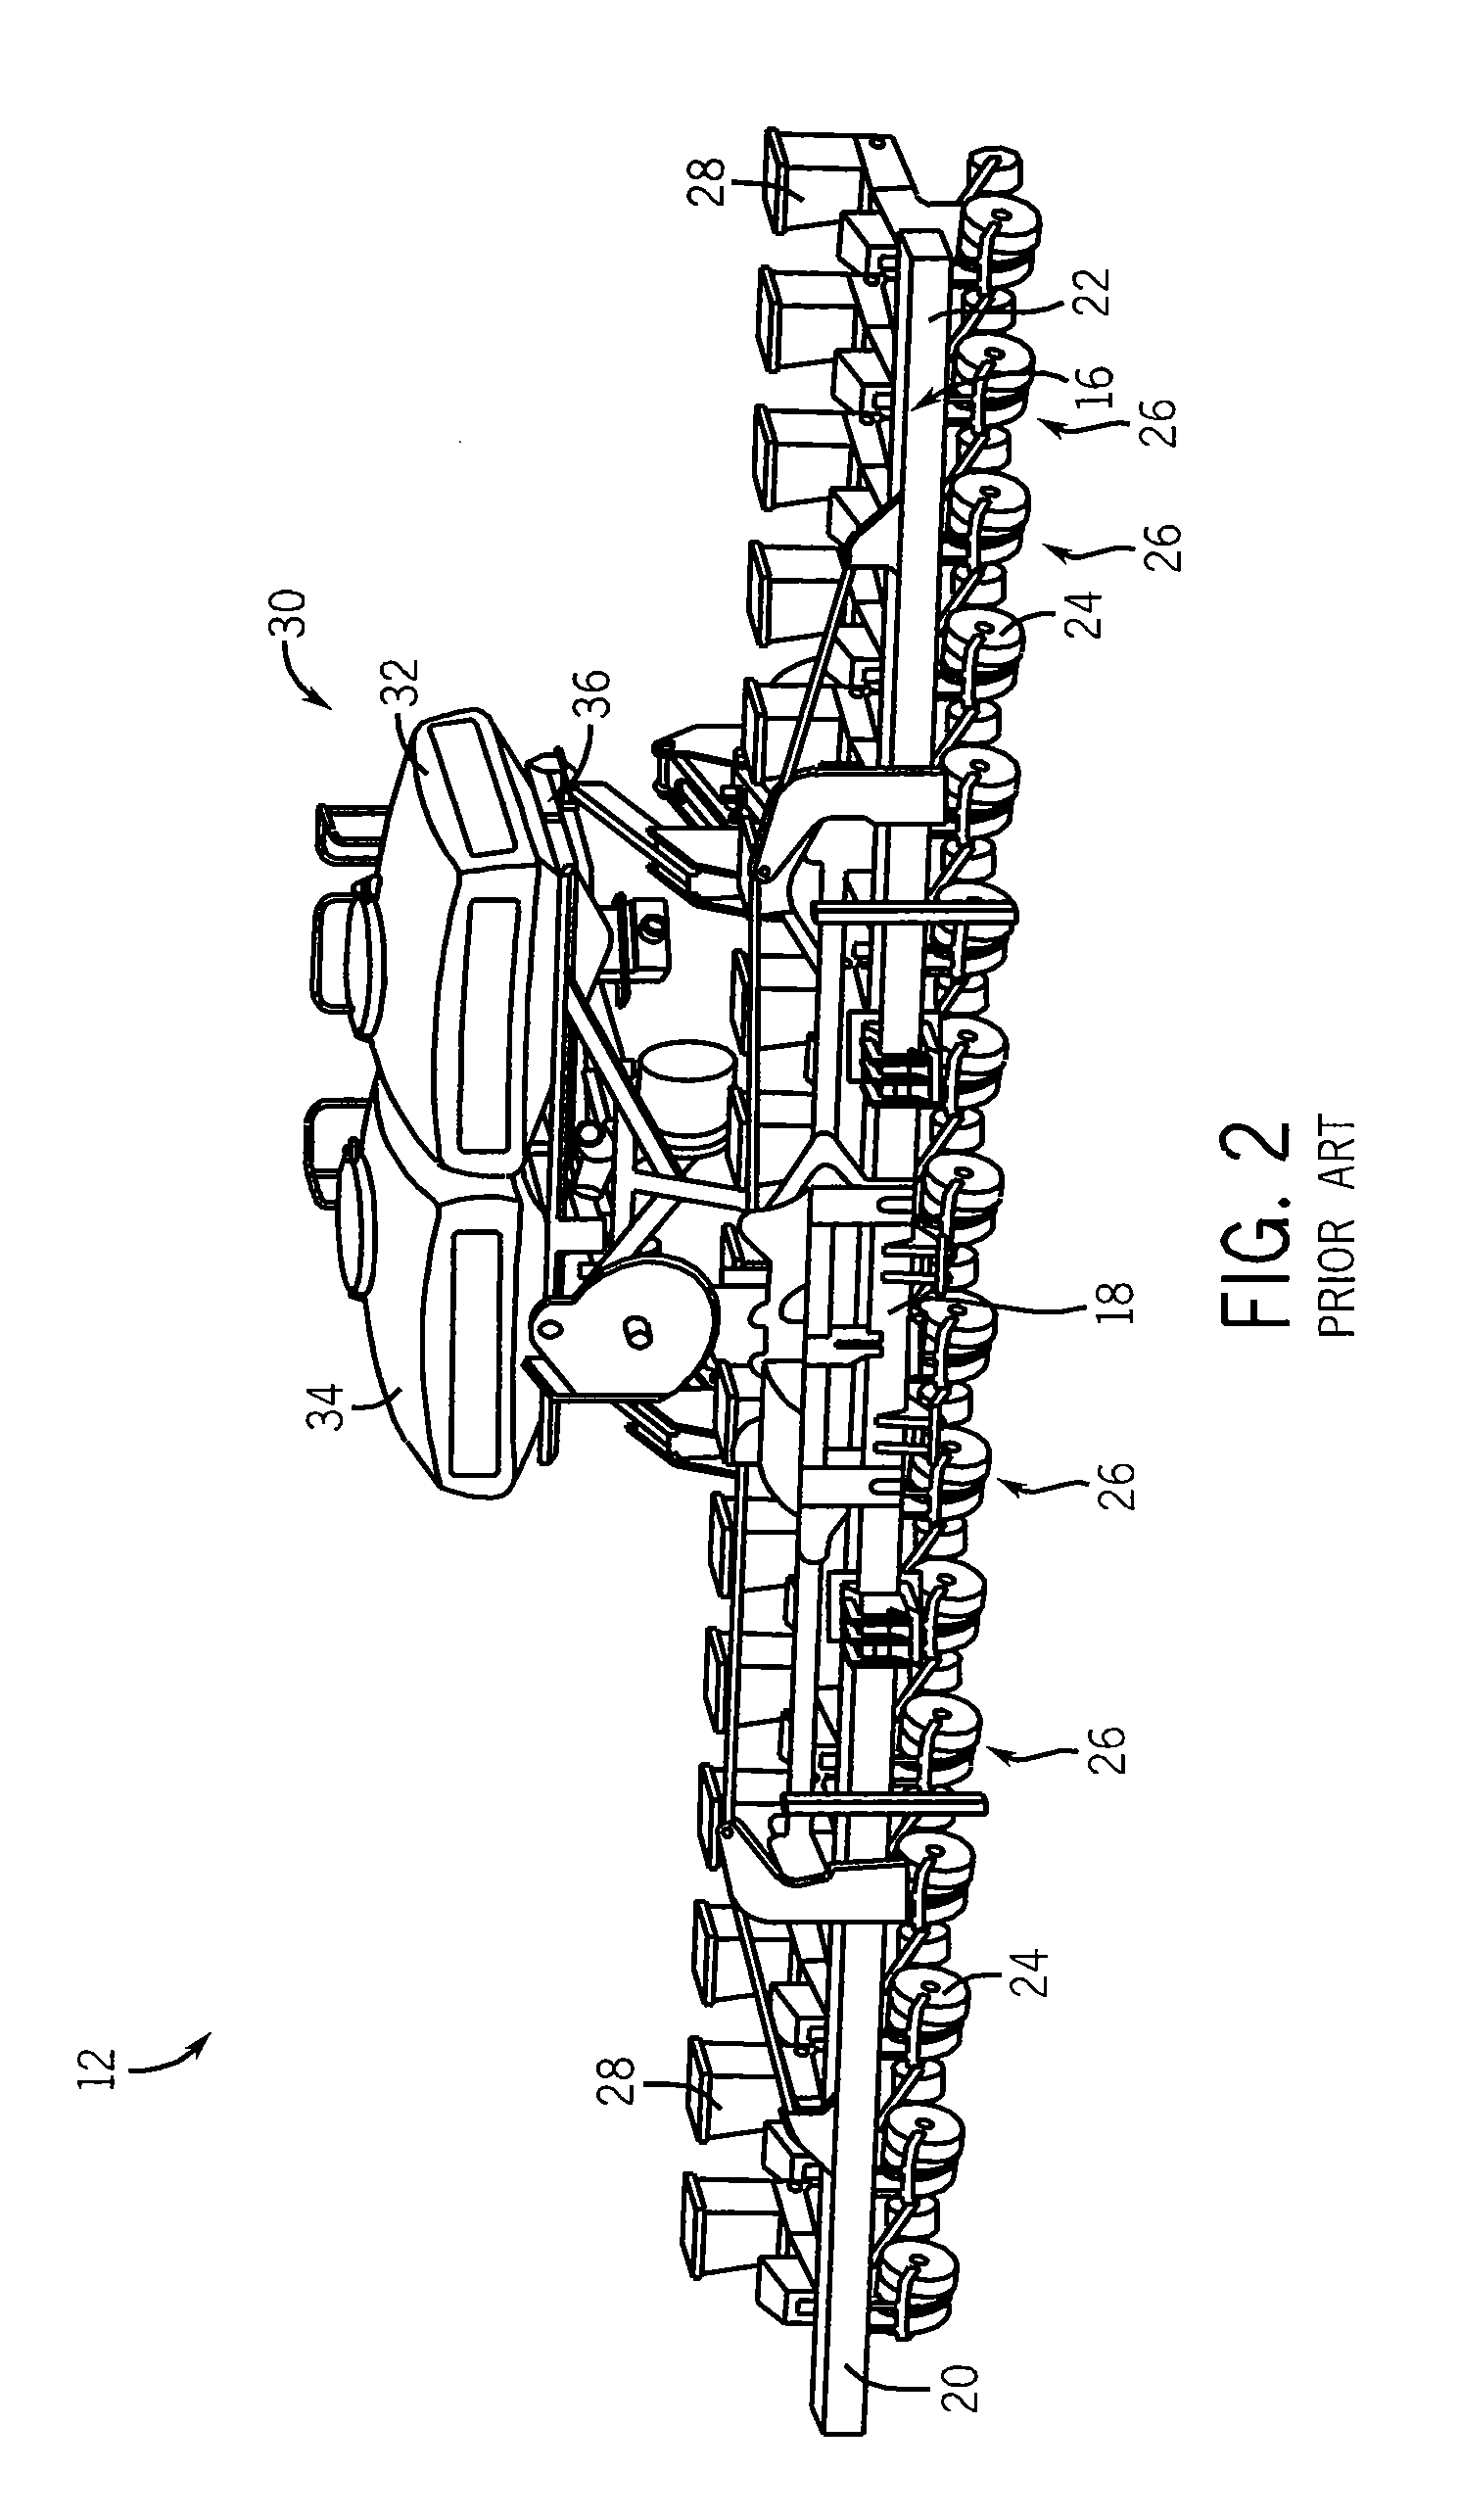 Method And Apparatus For Auto-Leveling Of Bulk Fill Hopper Frame